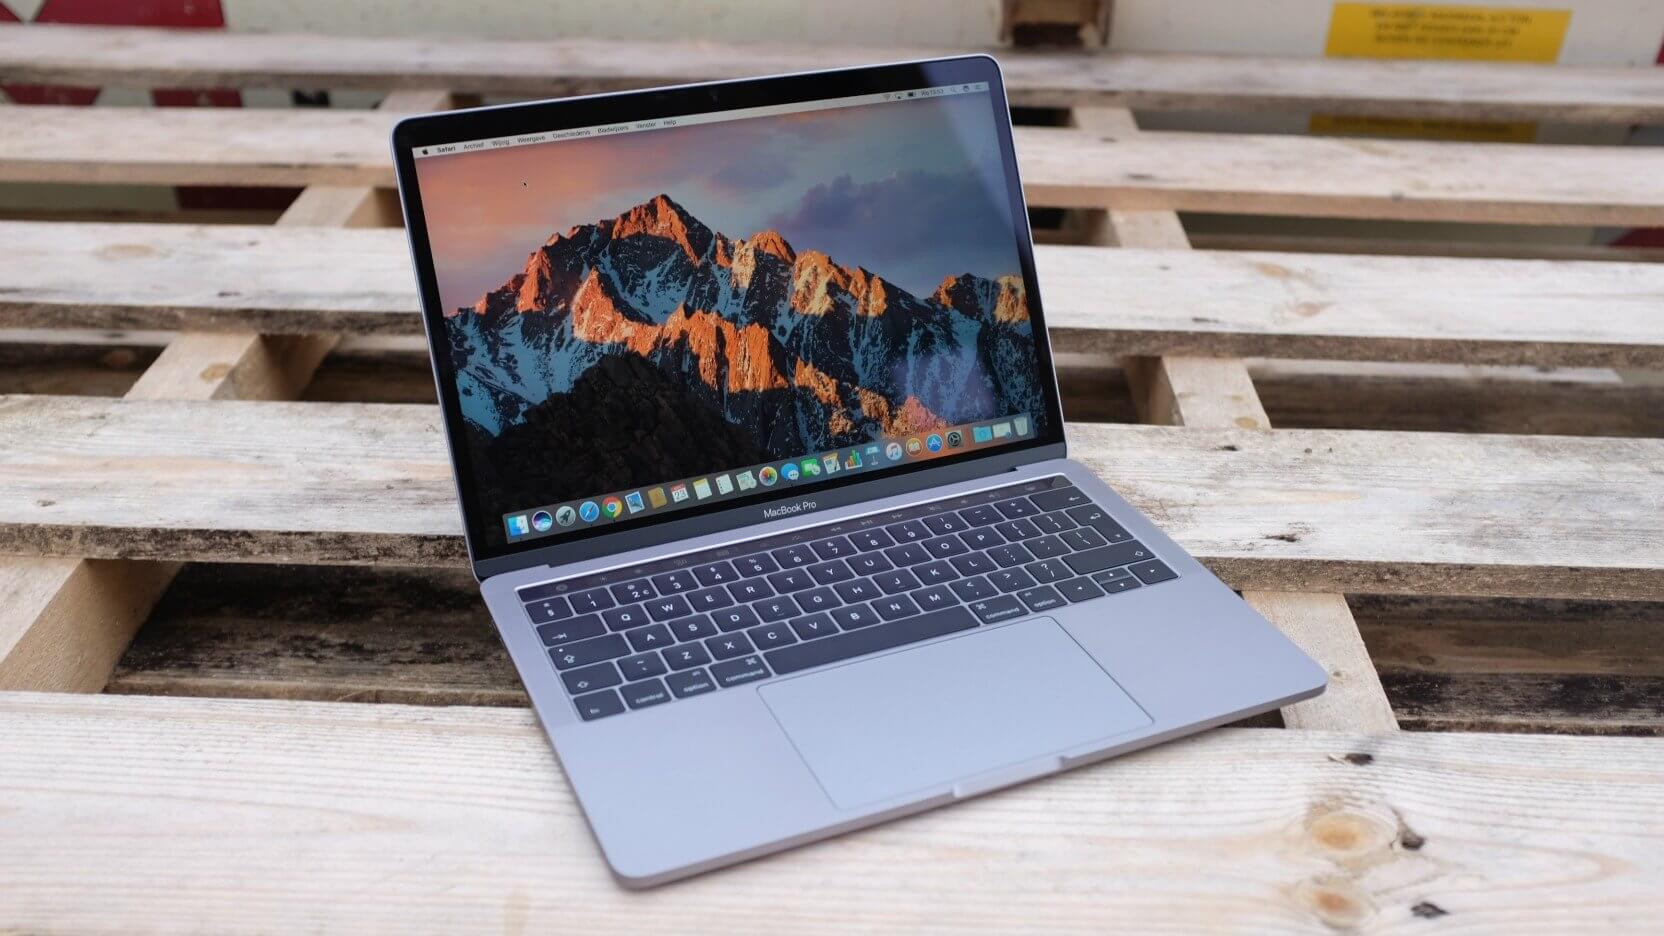 We tell How to keep your MacBook cool even in the heat